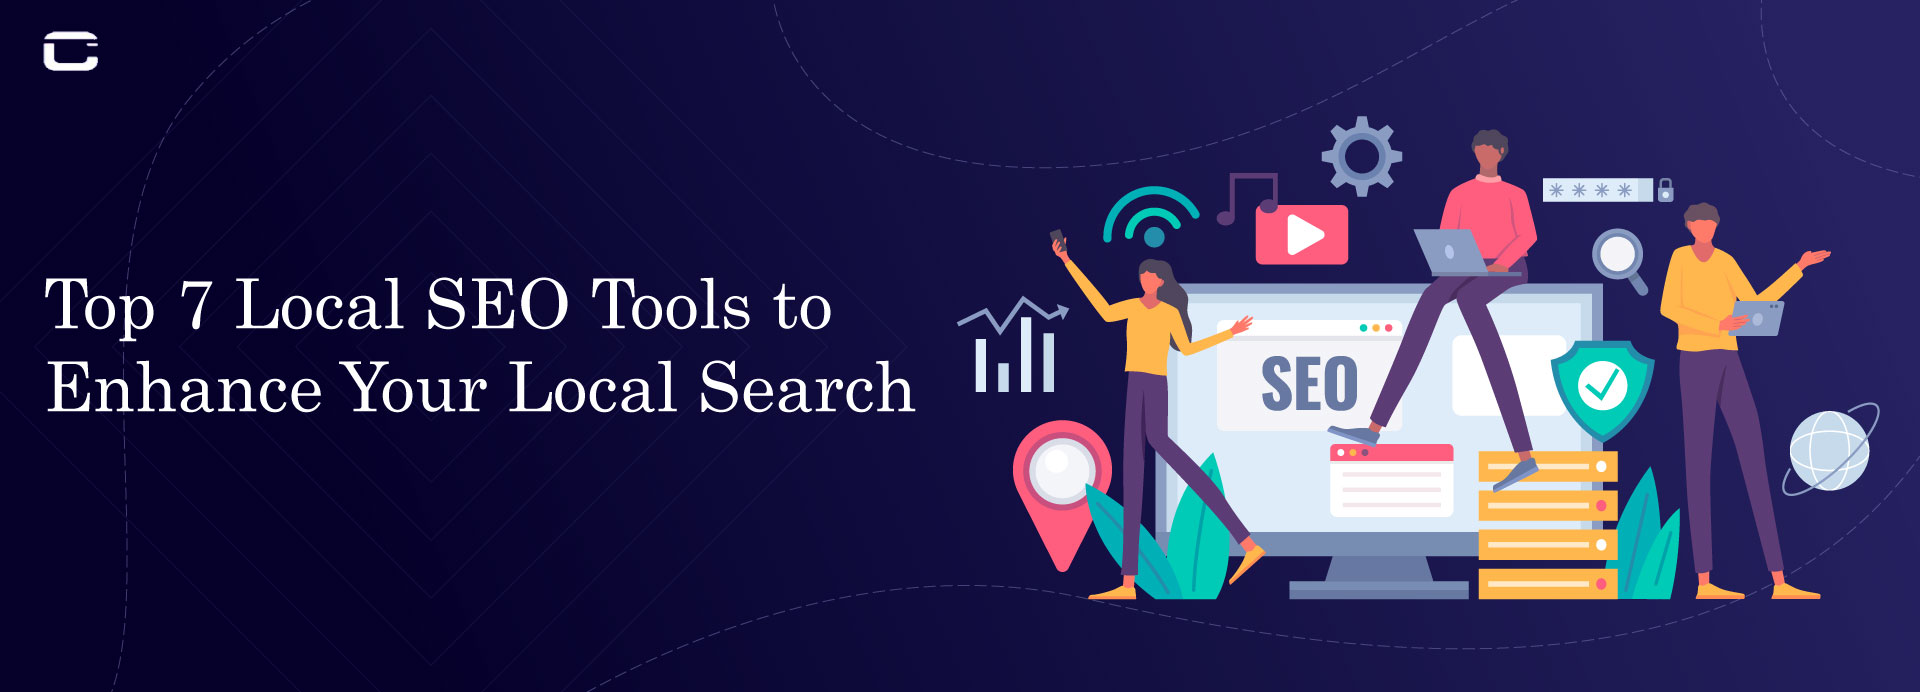 Top 7 Local SEO Tools to Enhance Your Local Search